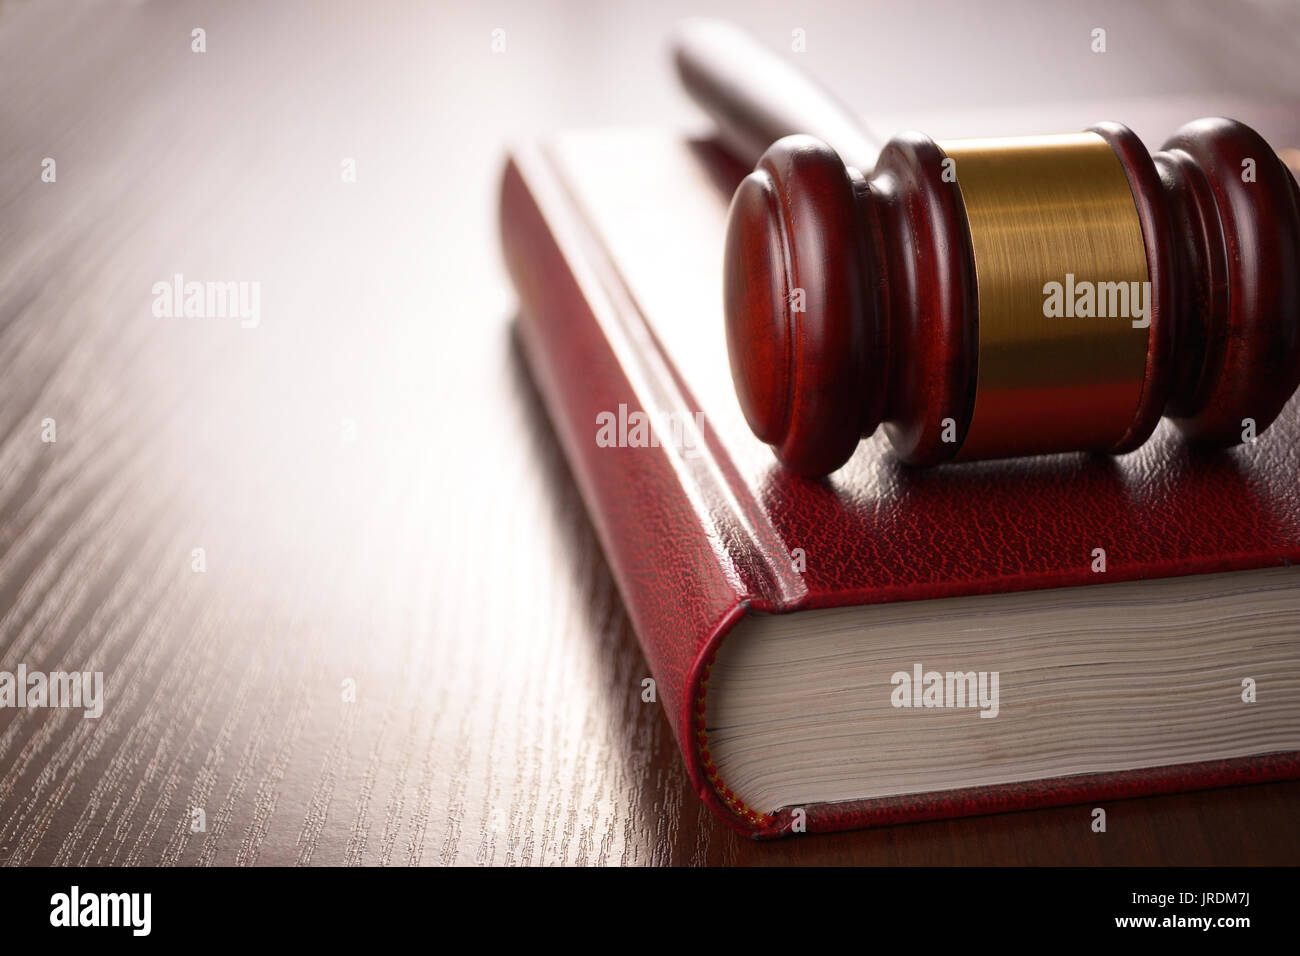 Wooden judges gavel lying on a law book in a courtroom for dispensing justice and sentencing crimes Stock Photo